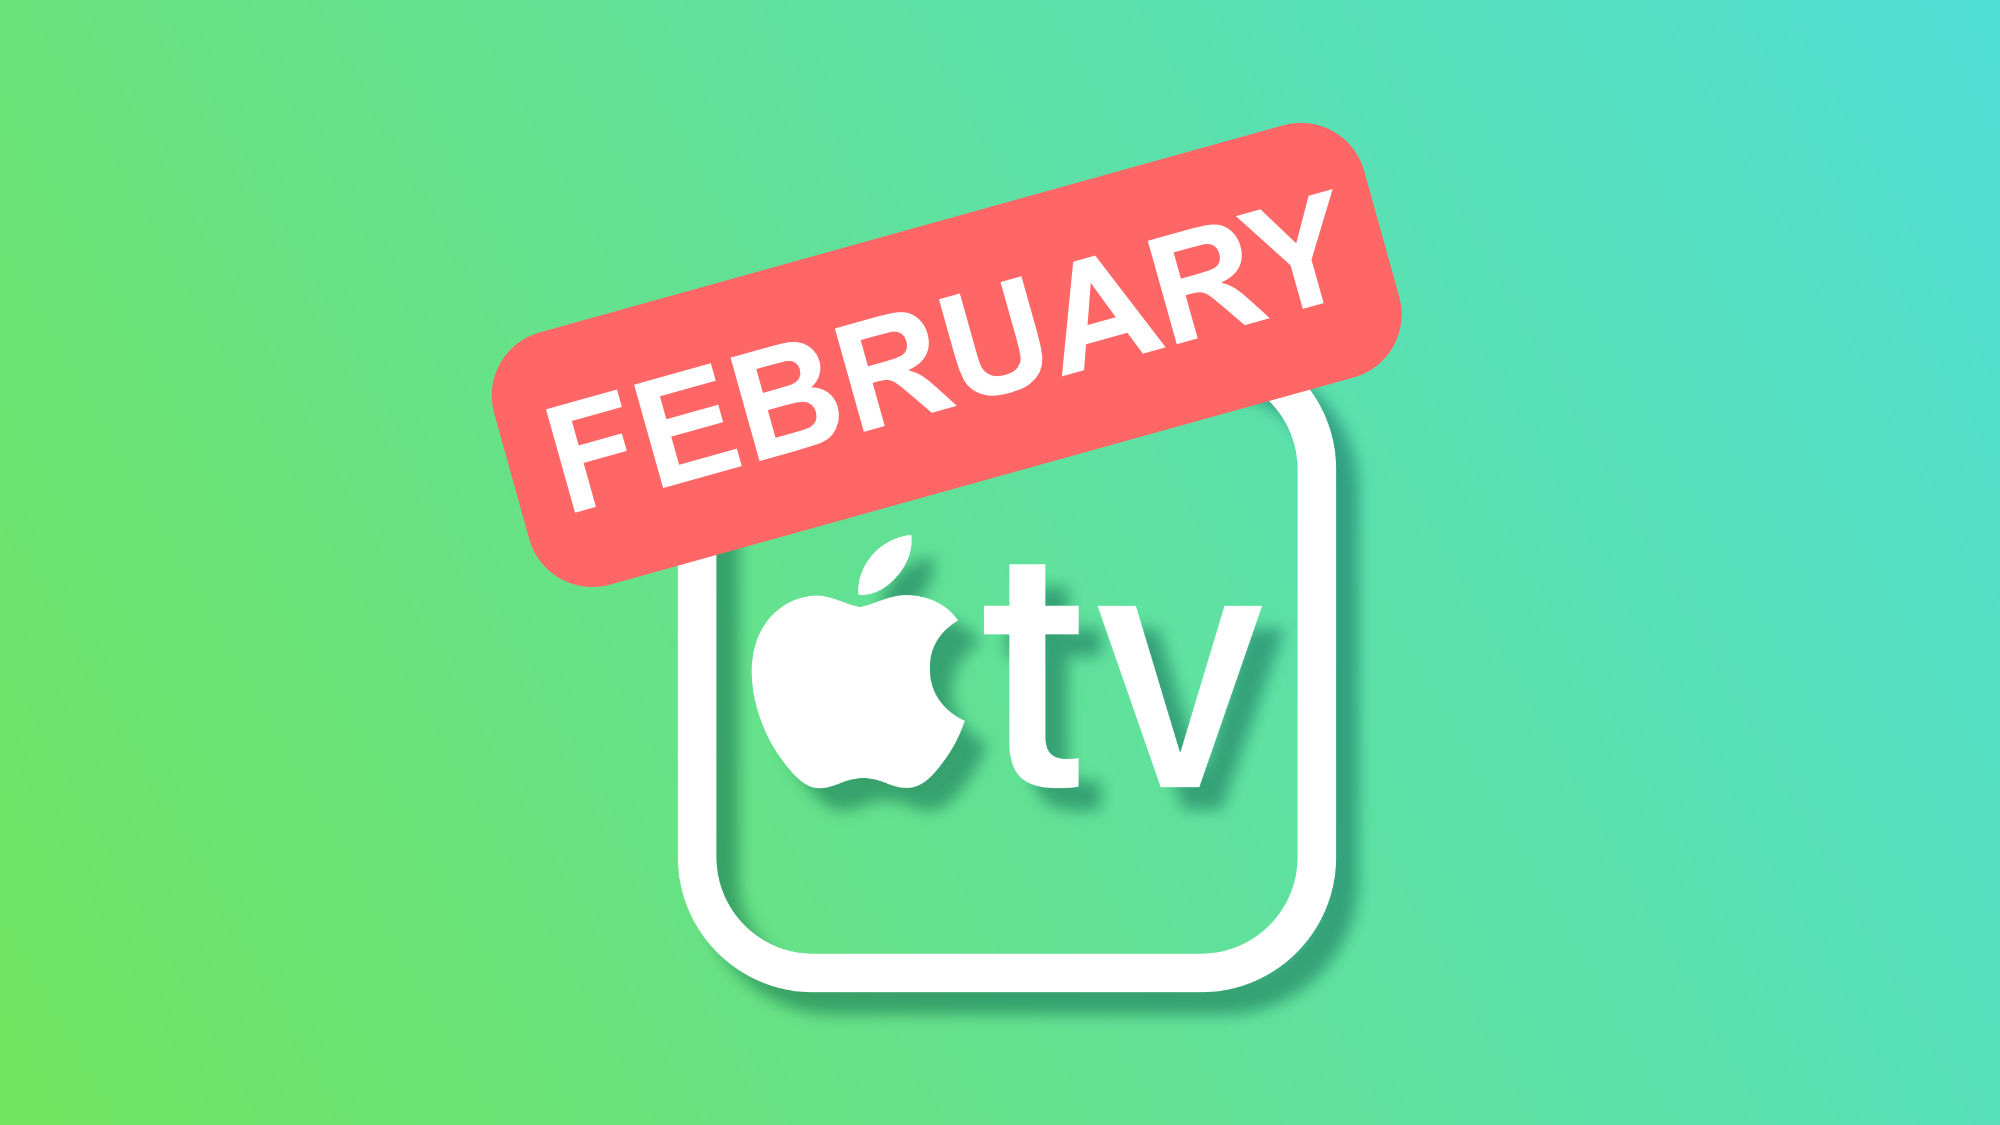 All Apple TV+ releases scheduled for this February